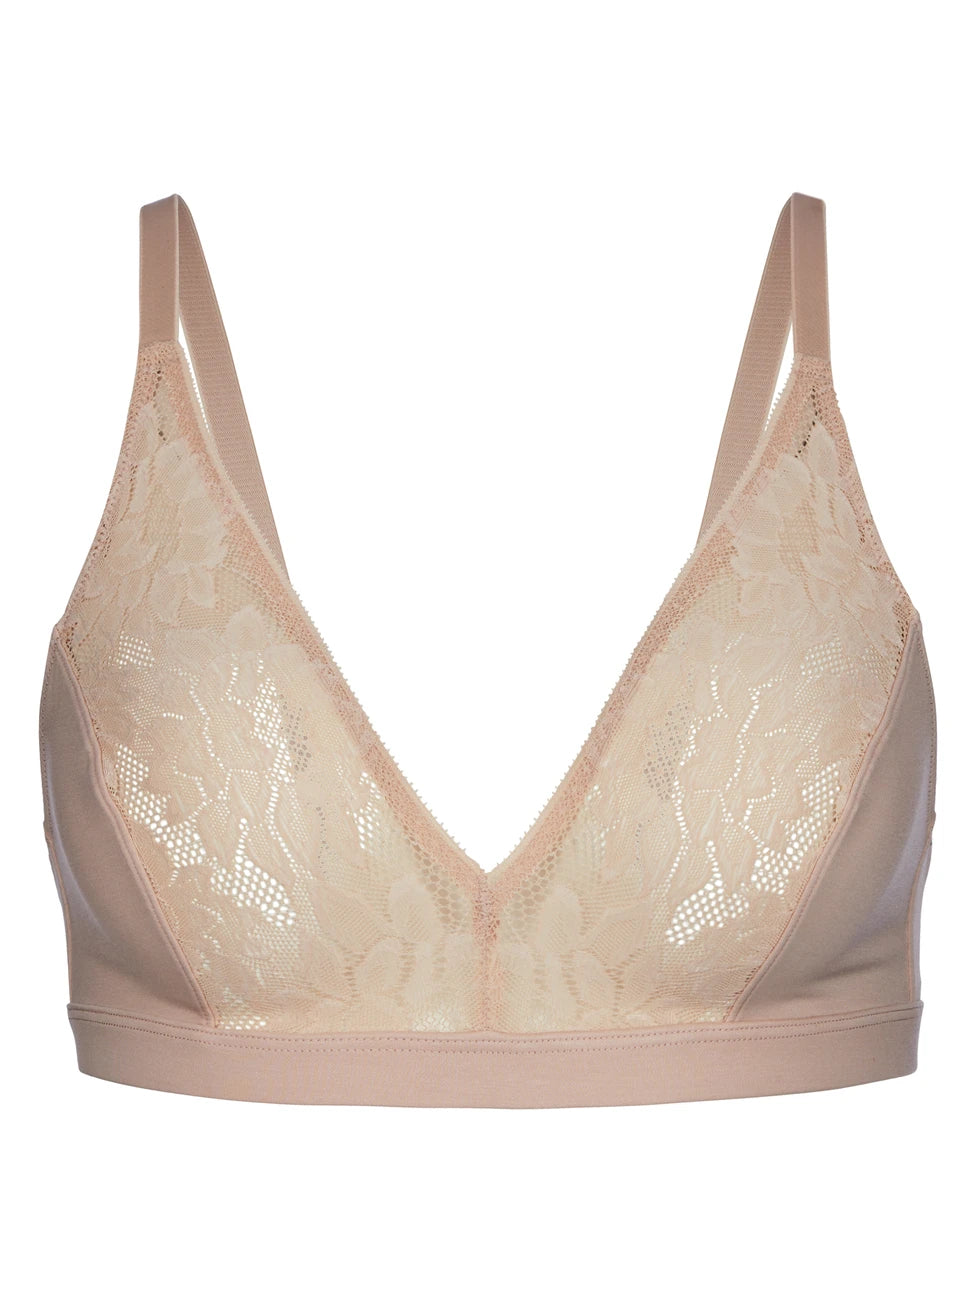 CALIDA
NATURAL SKIN LACE
Soft non-wired bra, Cradle to Cradle Certified